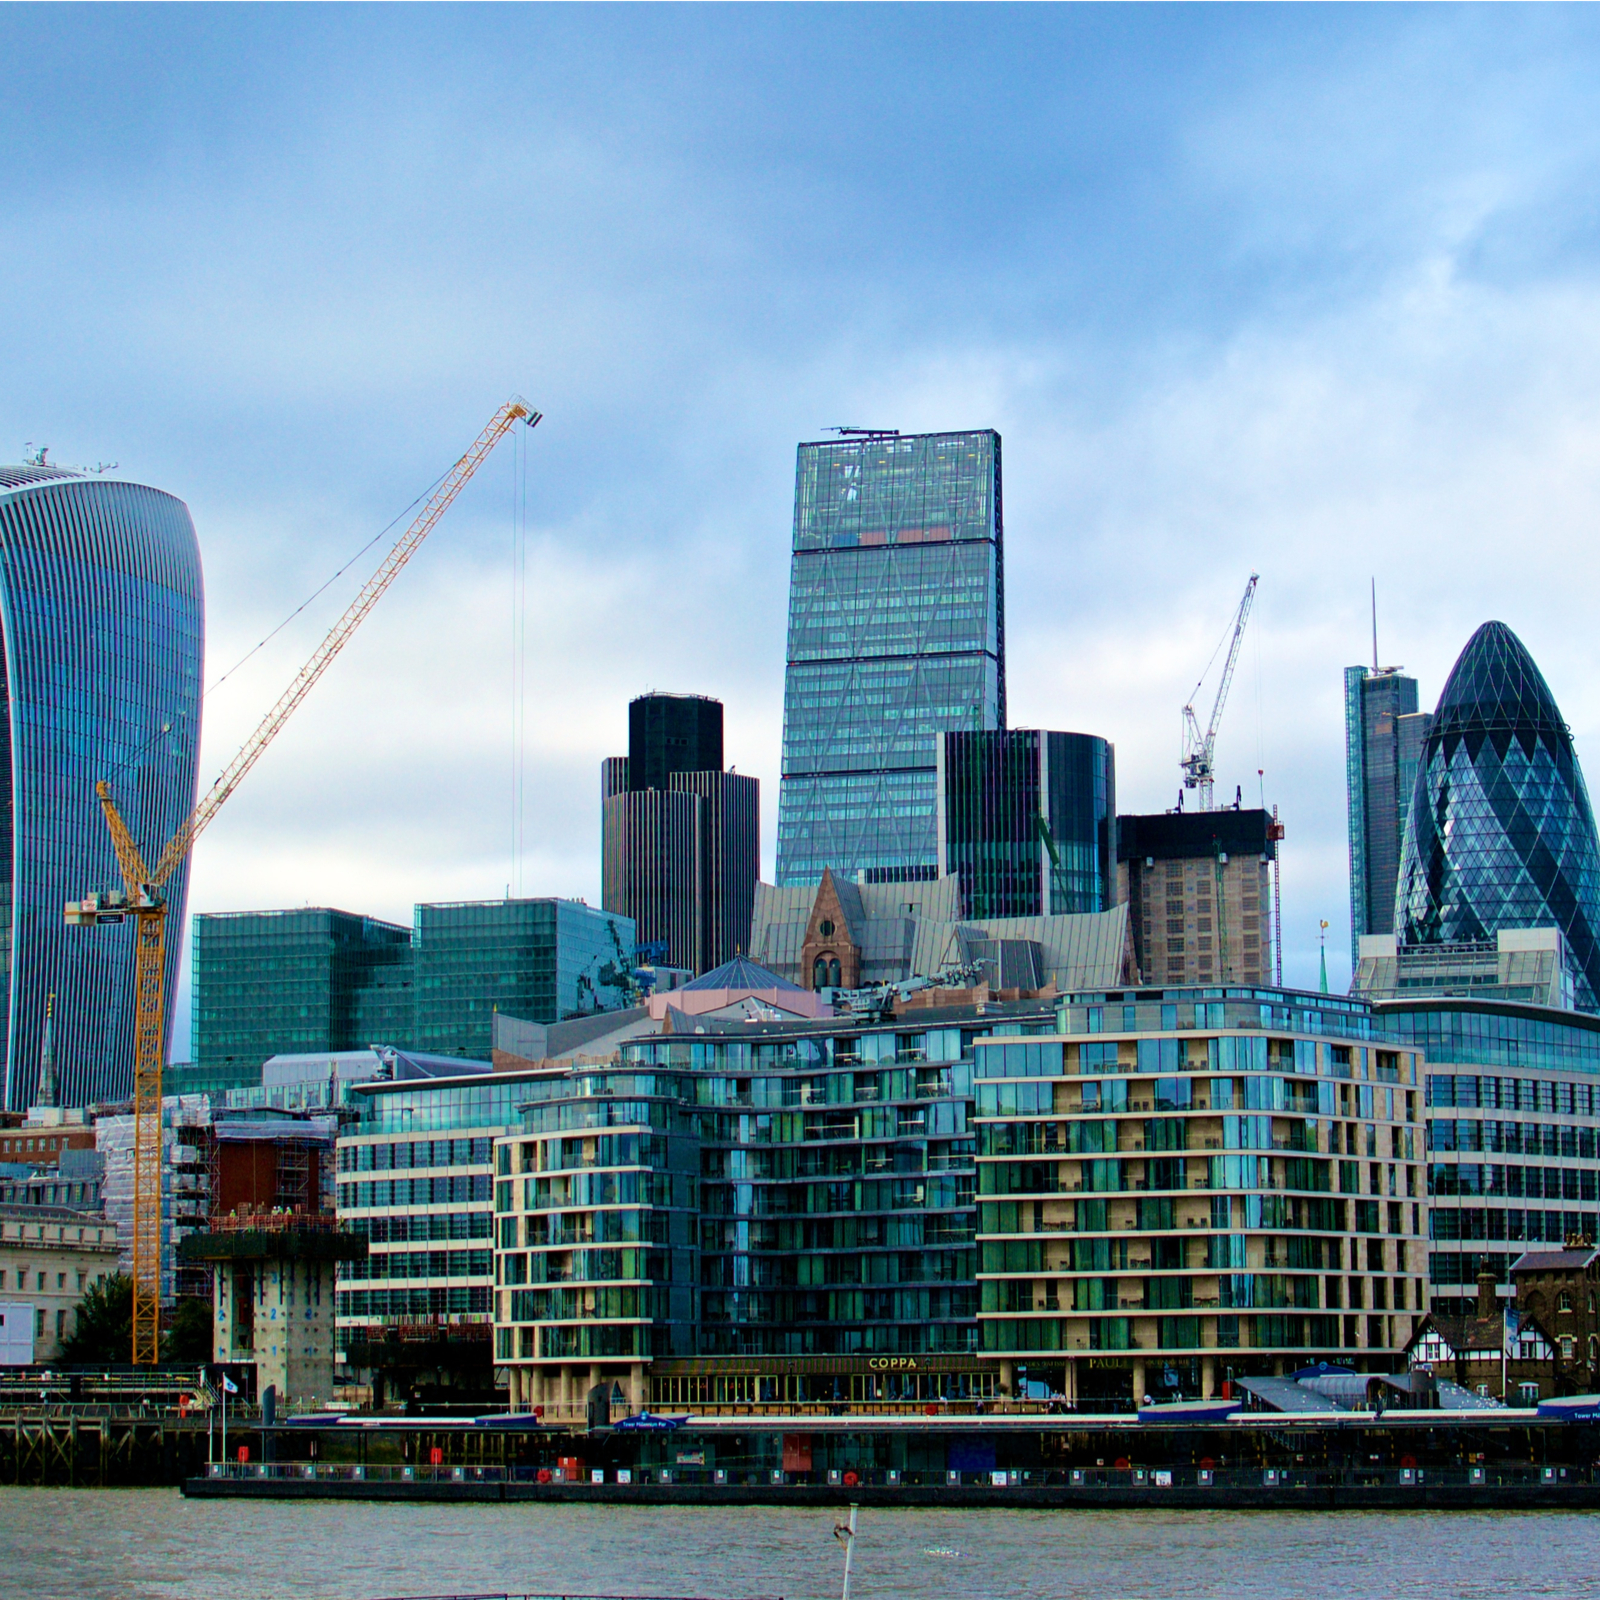 Dominance of Big Banks in UK Means London Might Miss the Boat on Bitcoin